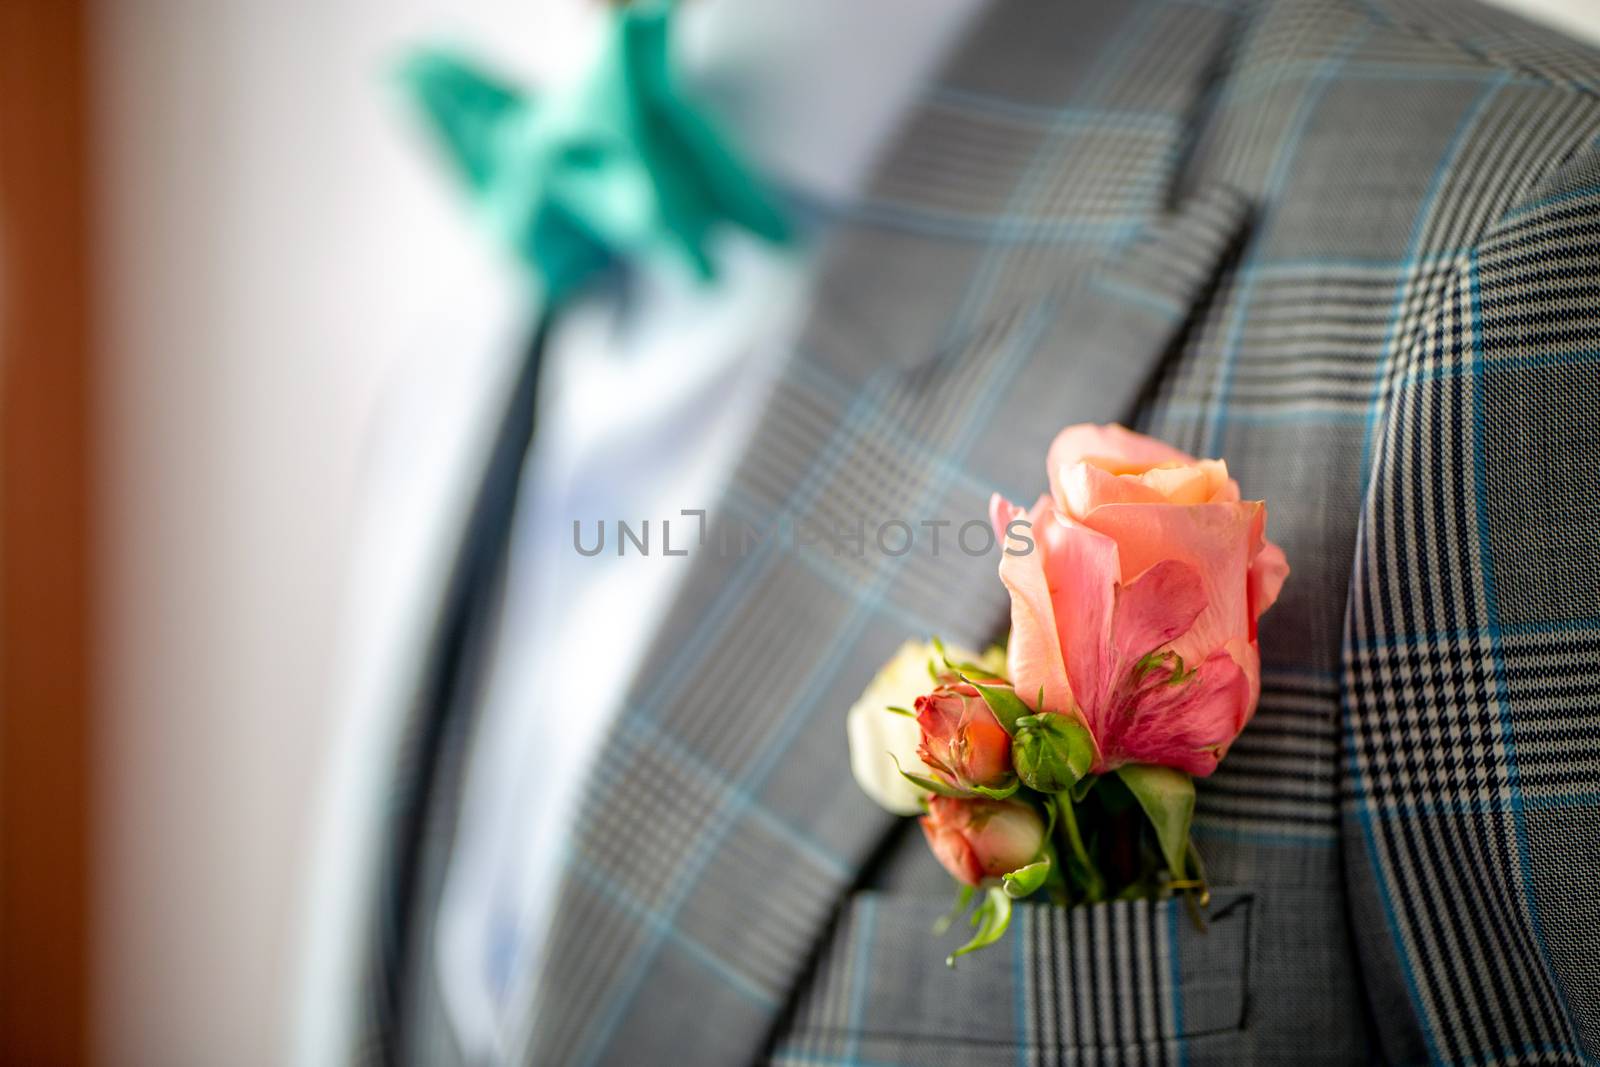 Wedding boutonniere of rose in pocket of checkered jacket of groom. Boutonniere of pink roses in the groom's pocket of jacket.